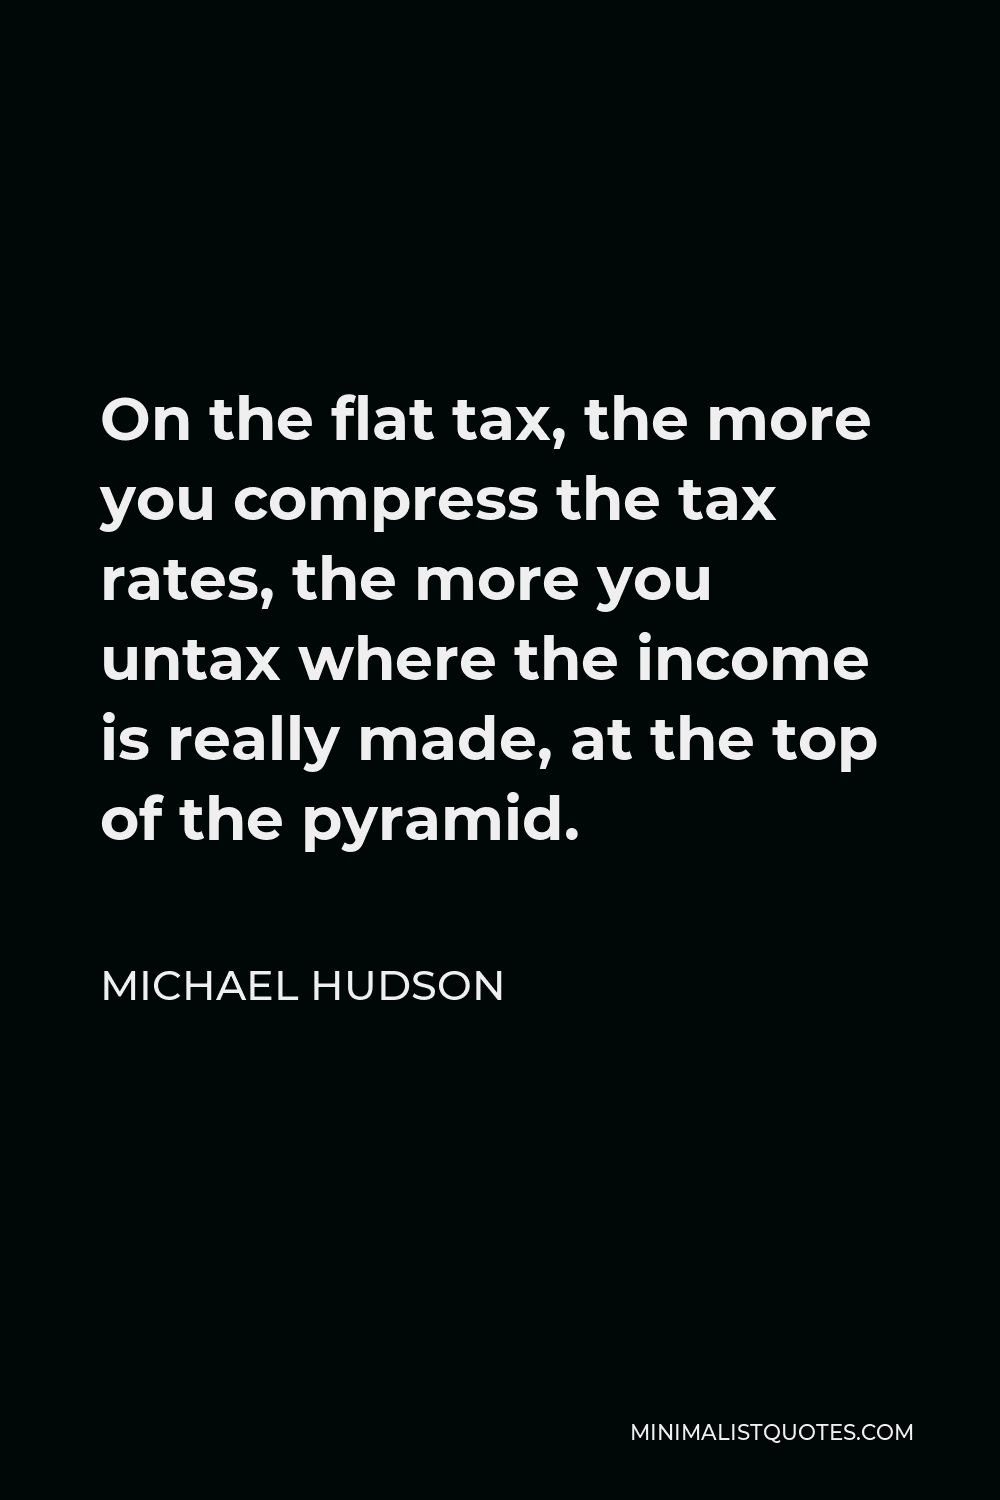 Michael Hudson Quote - On the flat tax, the more you compress the tax rates, the more you untax where the income is really made, at the top of the pyramid.